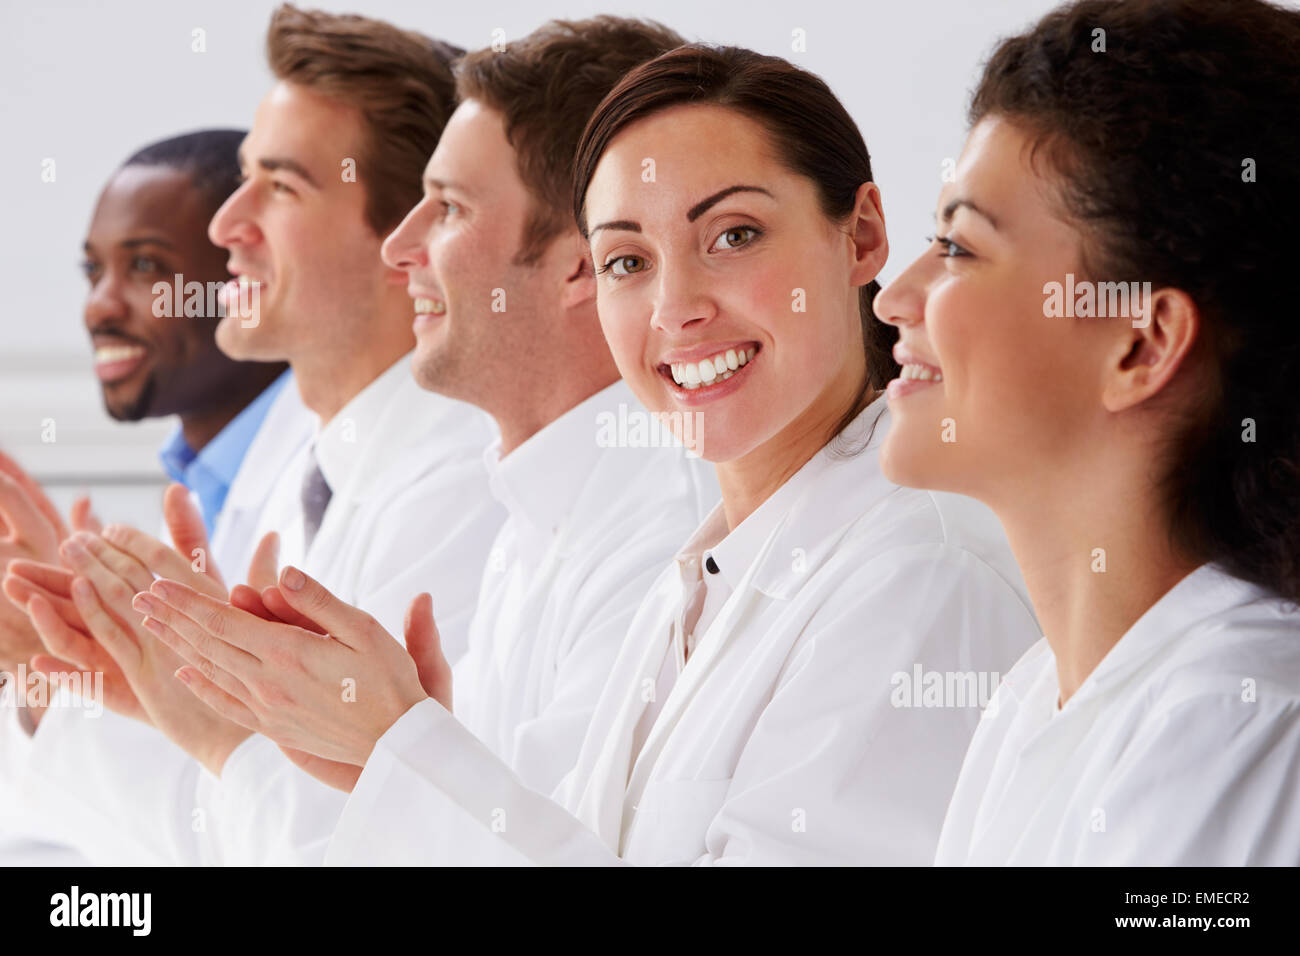 Portrait Of Technician And Colleagues In Laboratory Clapping Stock Photo